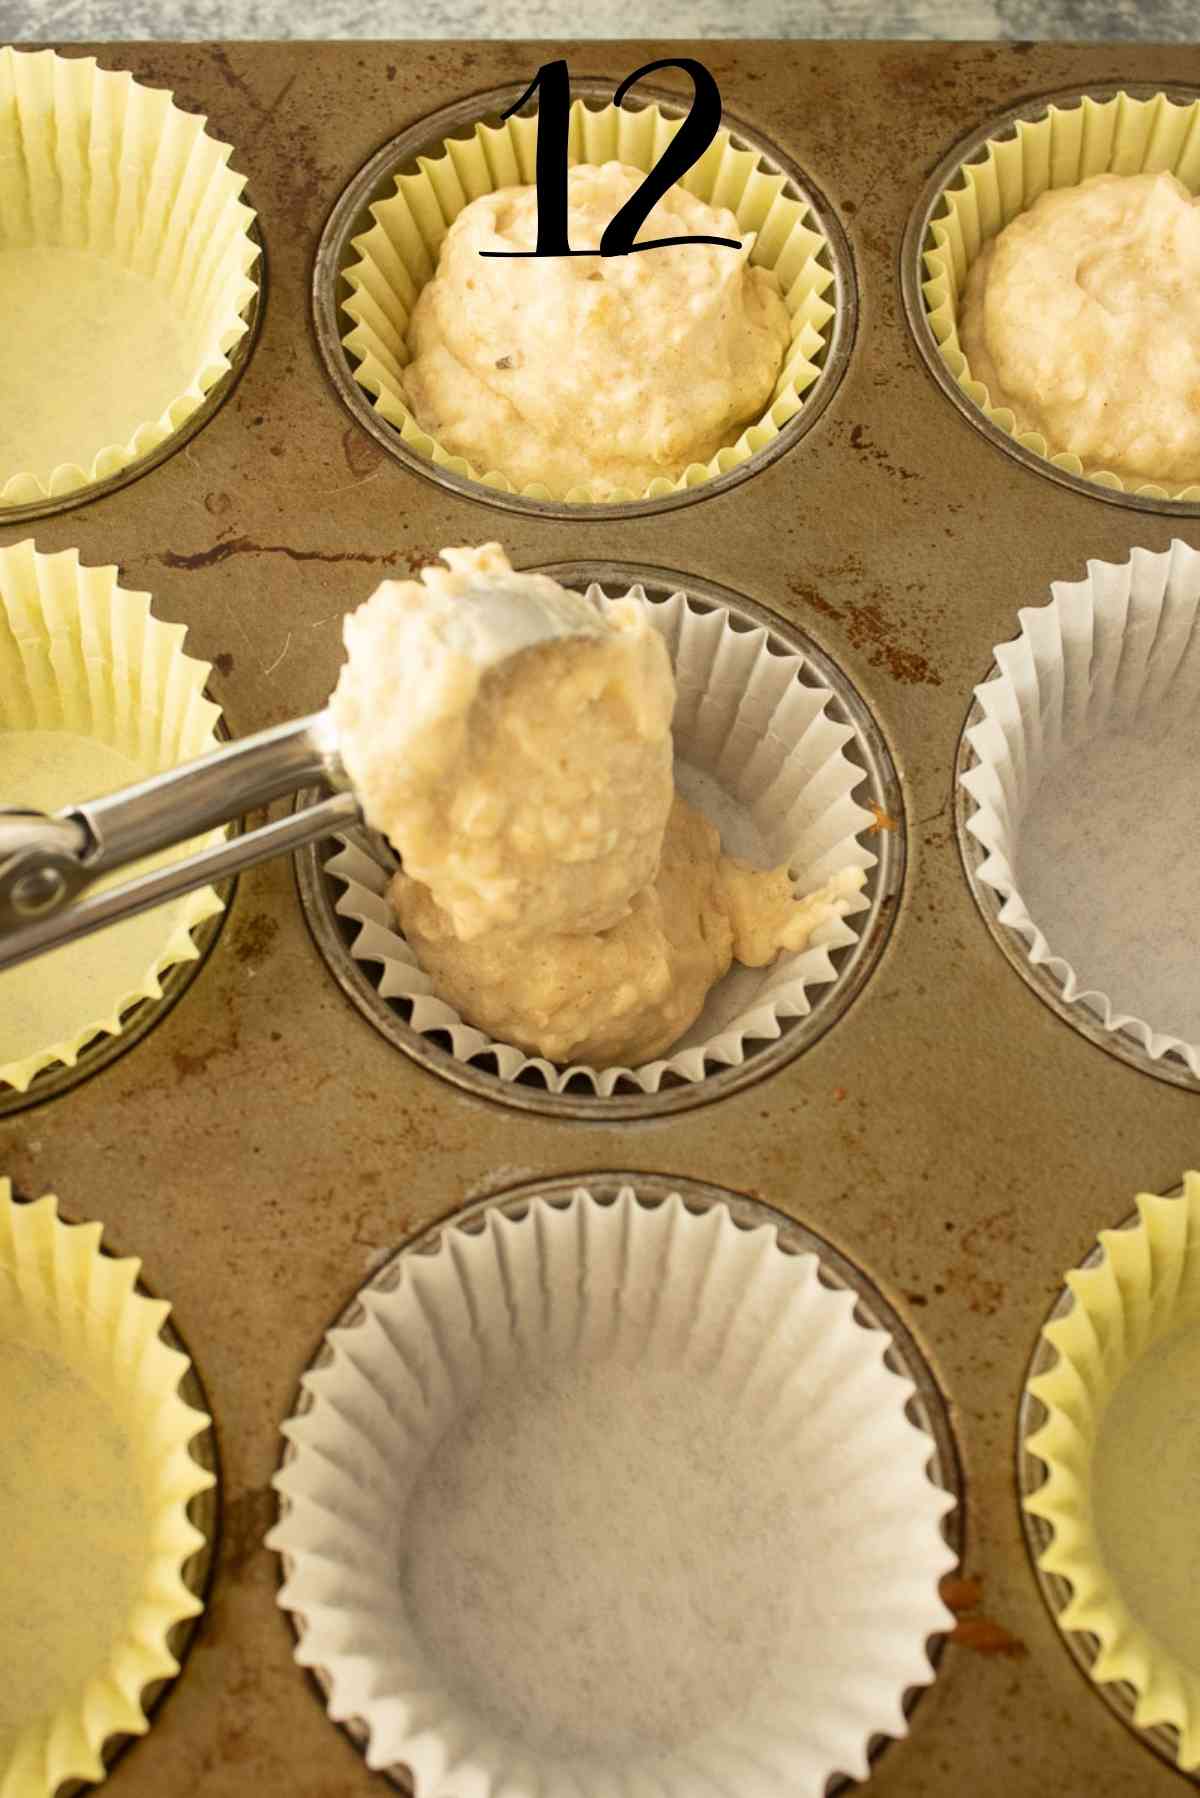 Batter scooped into muffin tins.